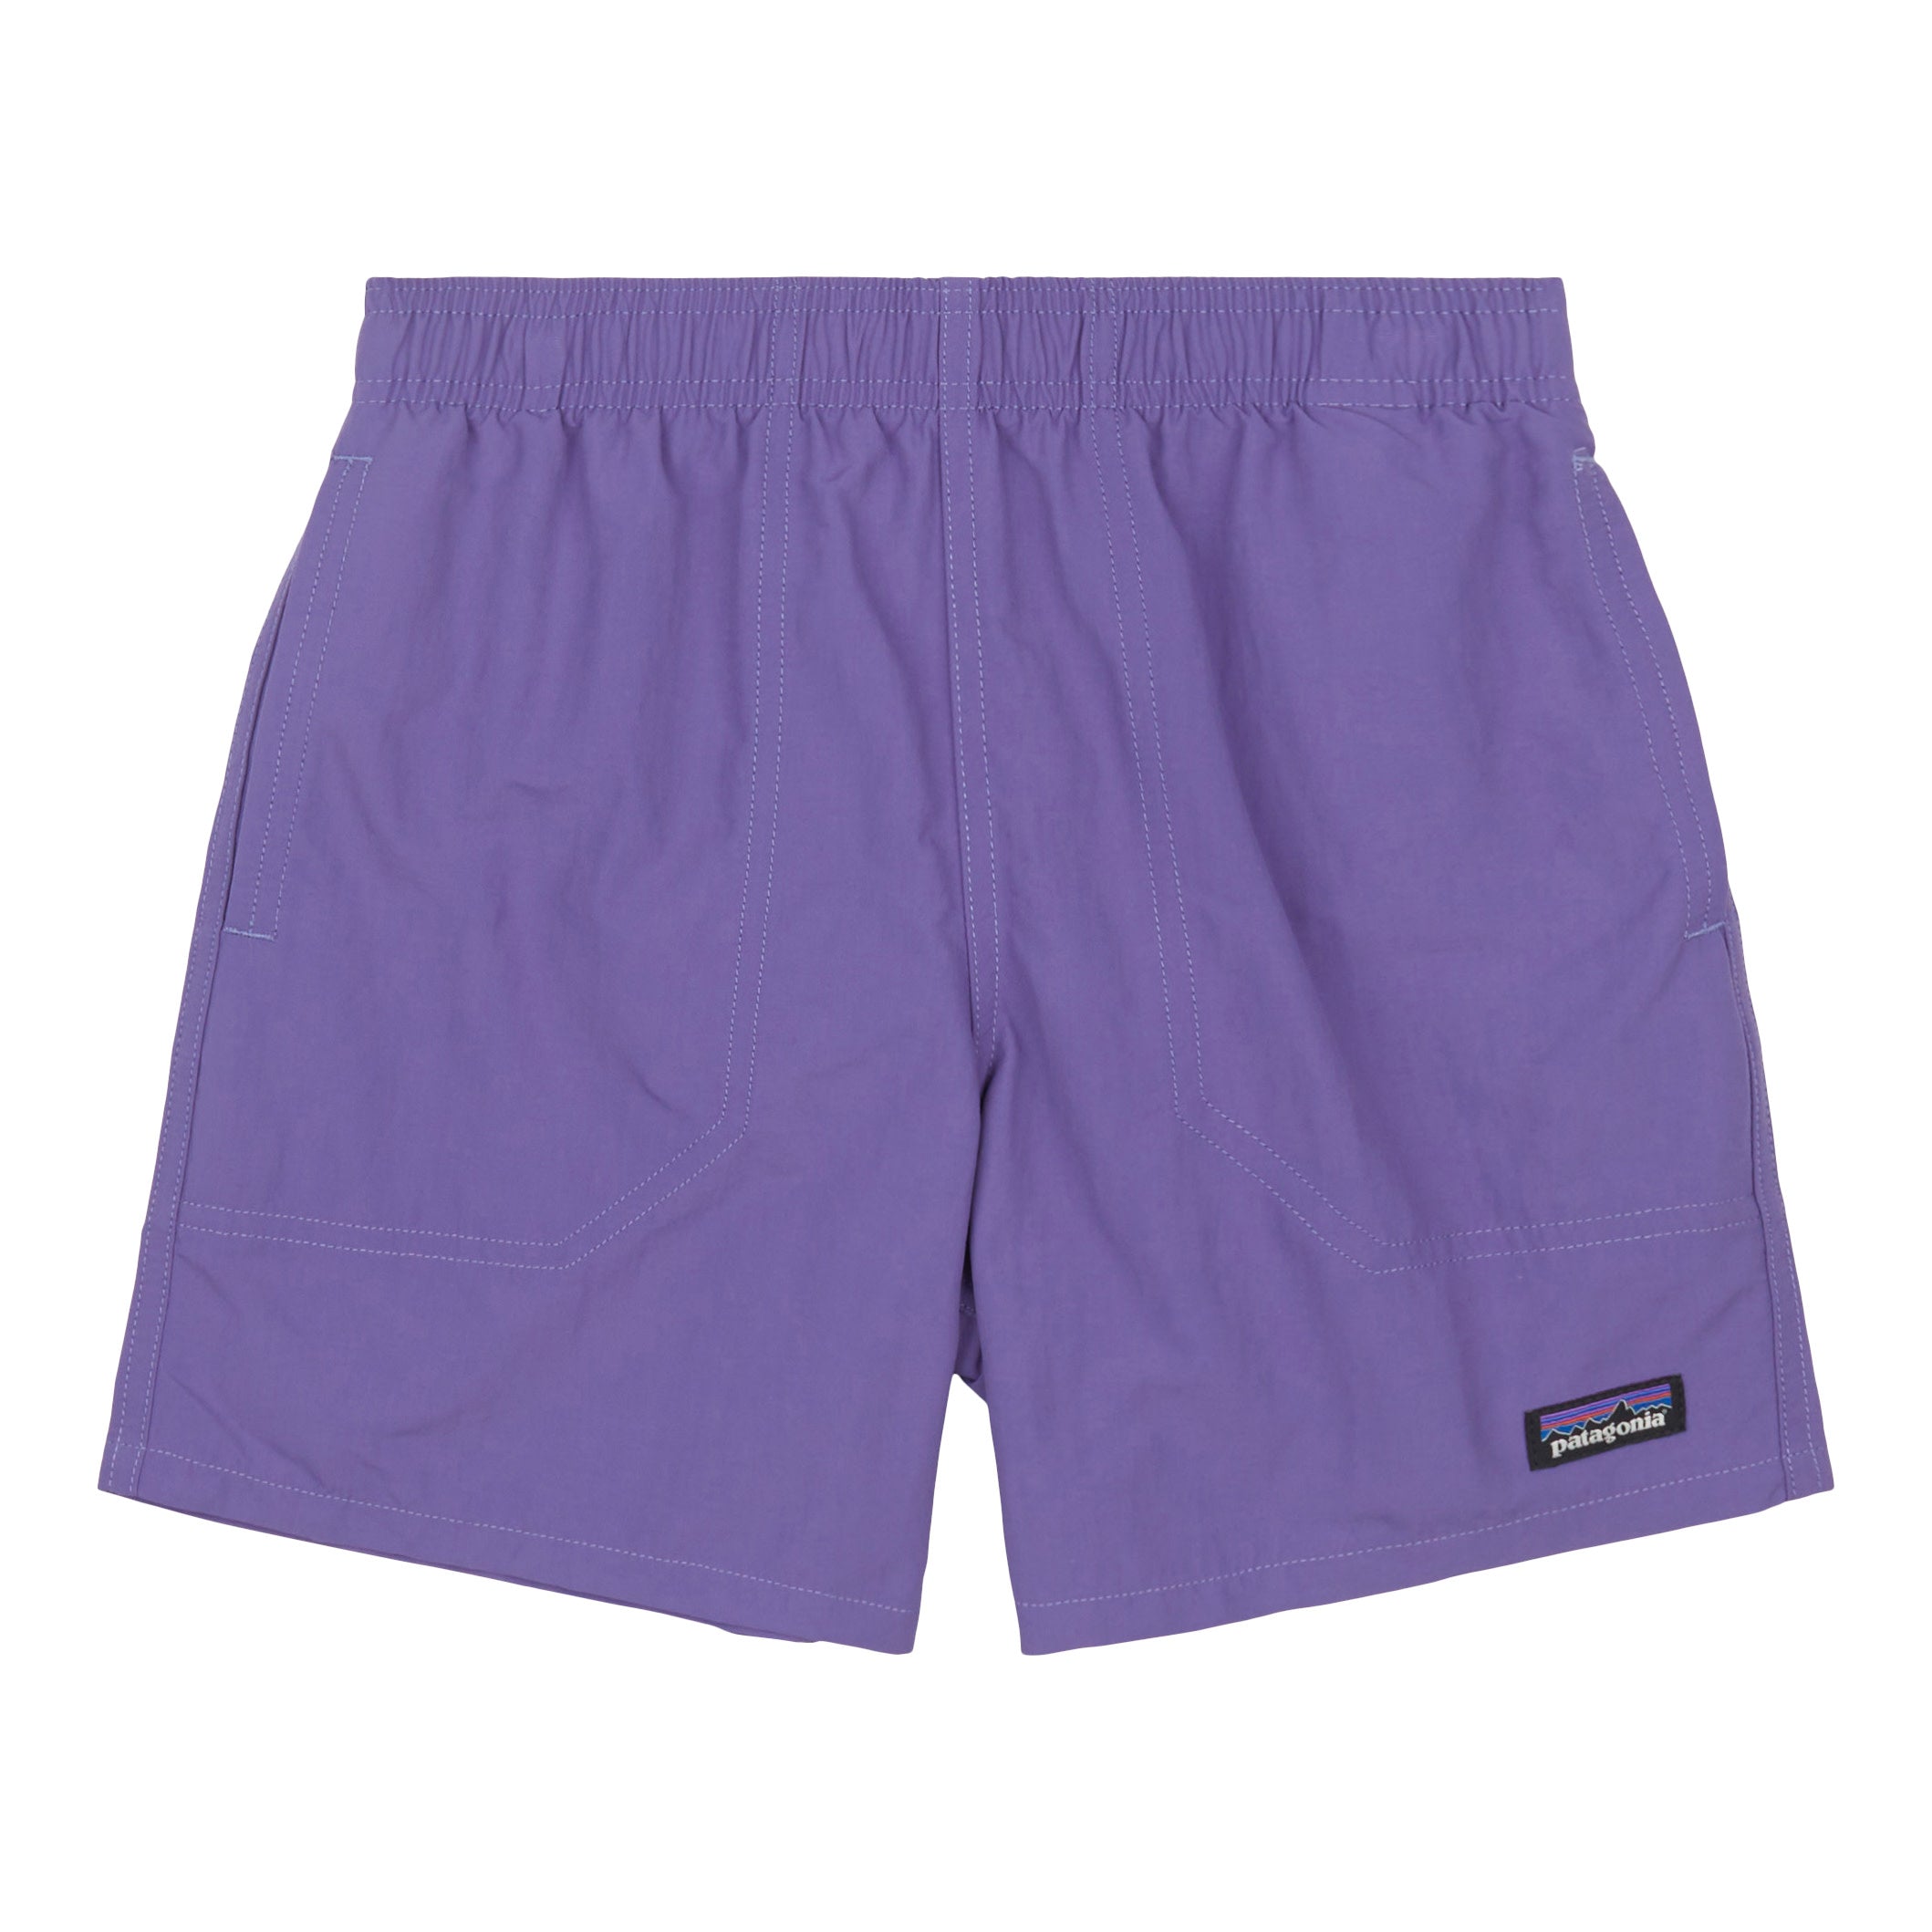 Patagonia Kids Baggies Shorts 5 in. - Lined Fly 50: Ink Black XL